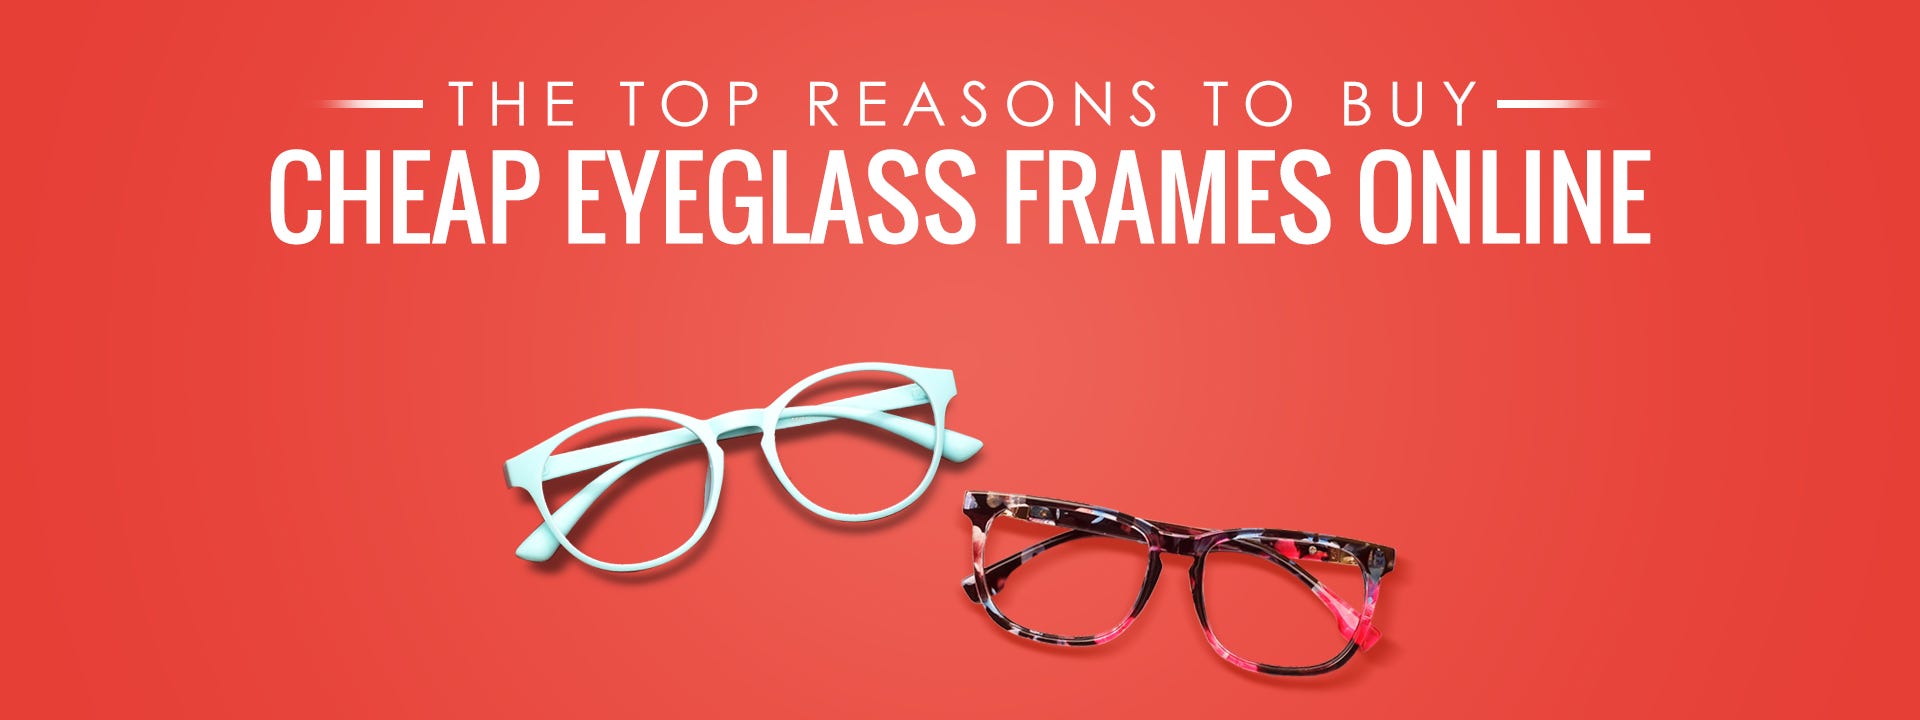 The Top Reasons To Buy Cheap Eyeglass Frames Online